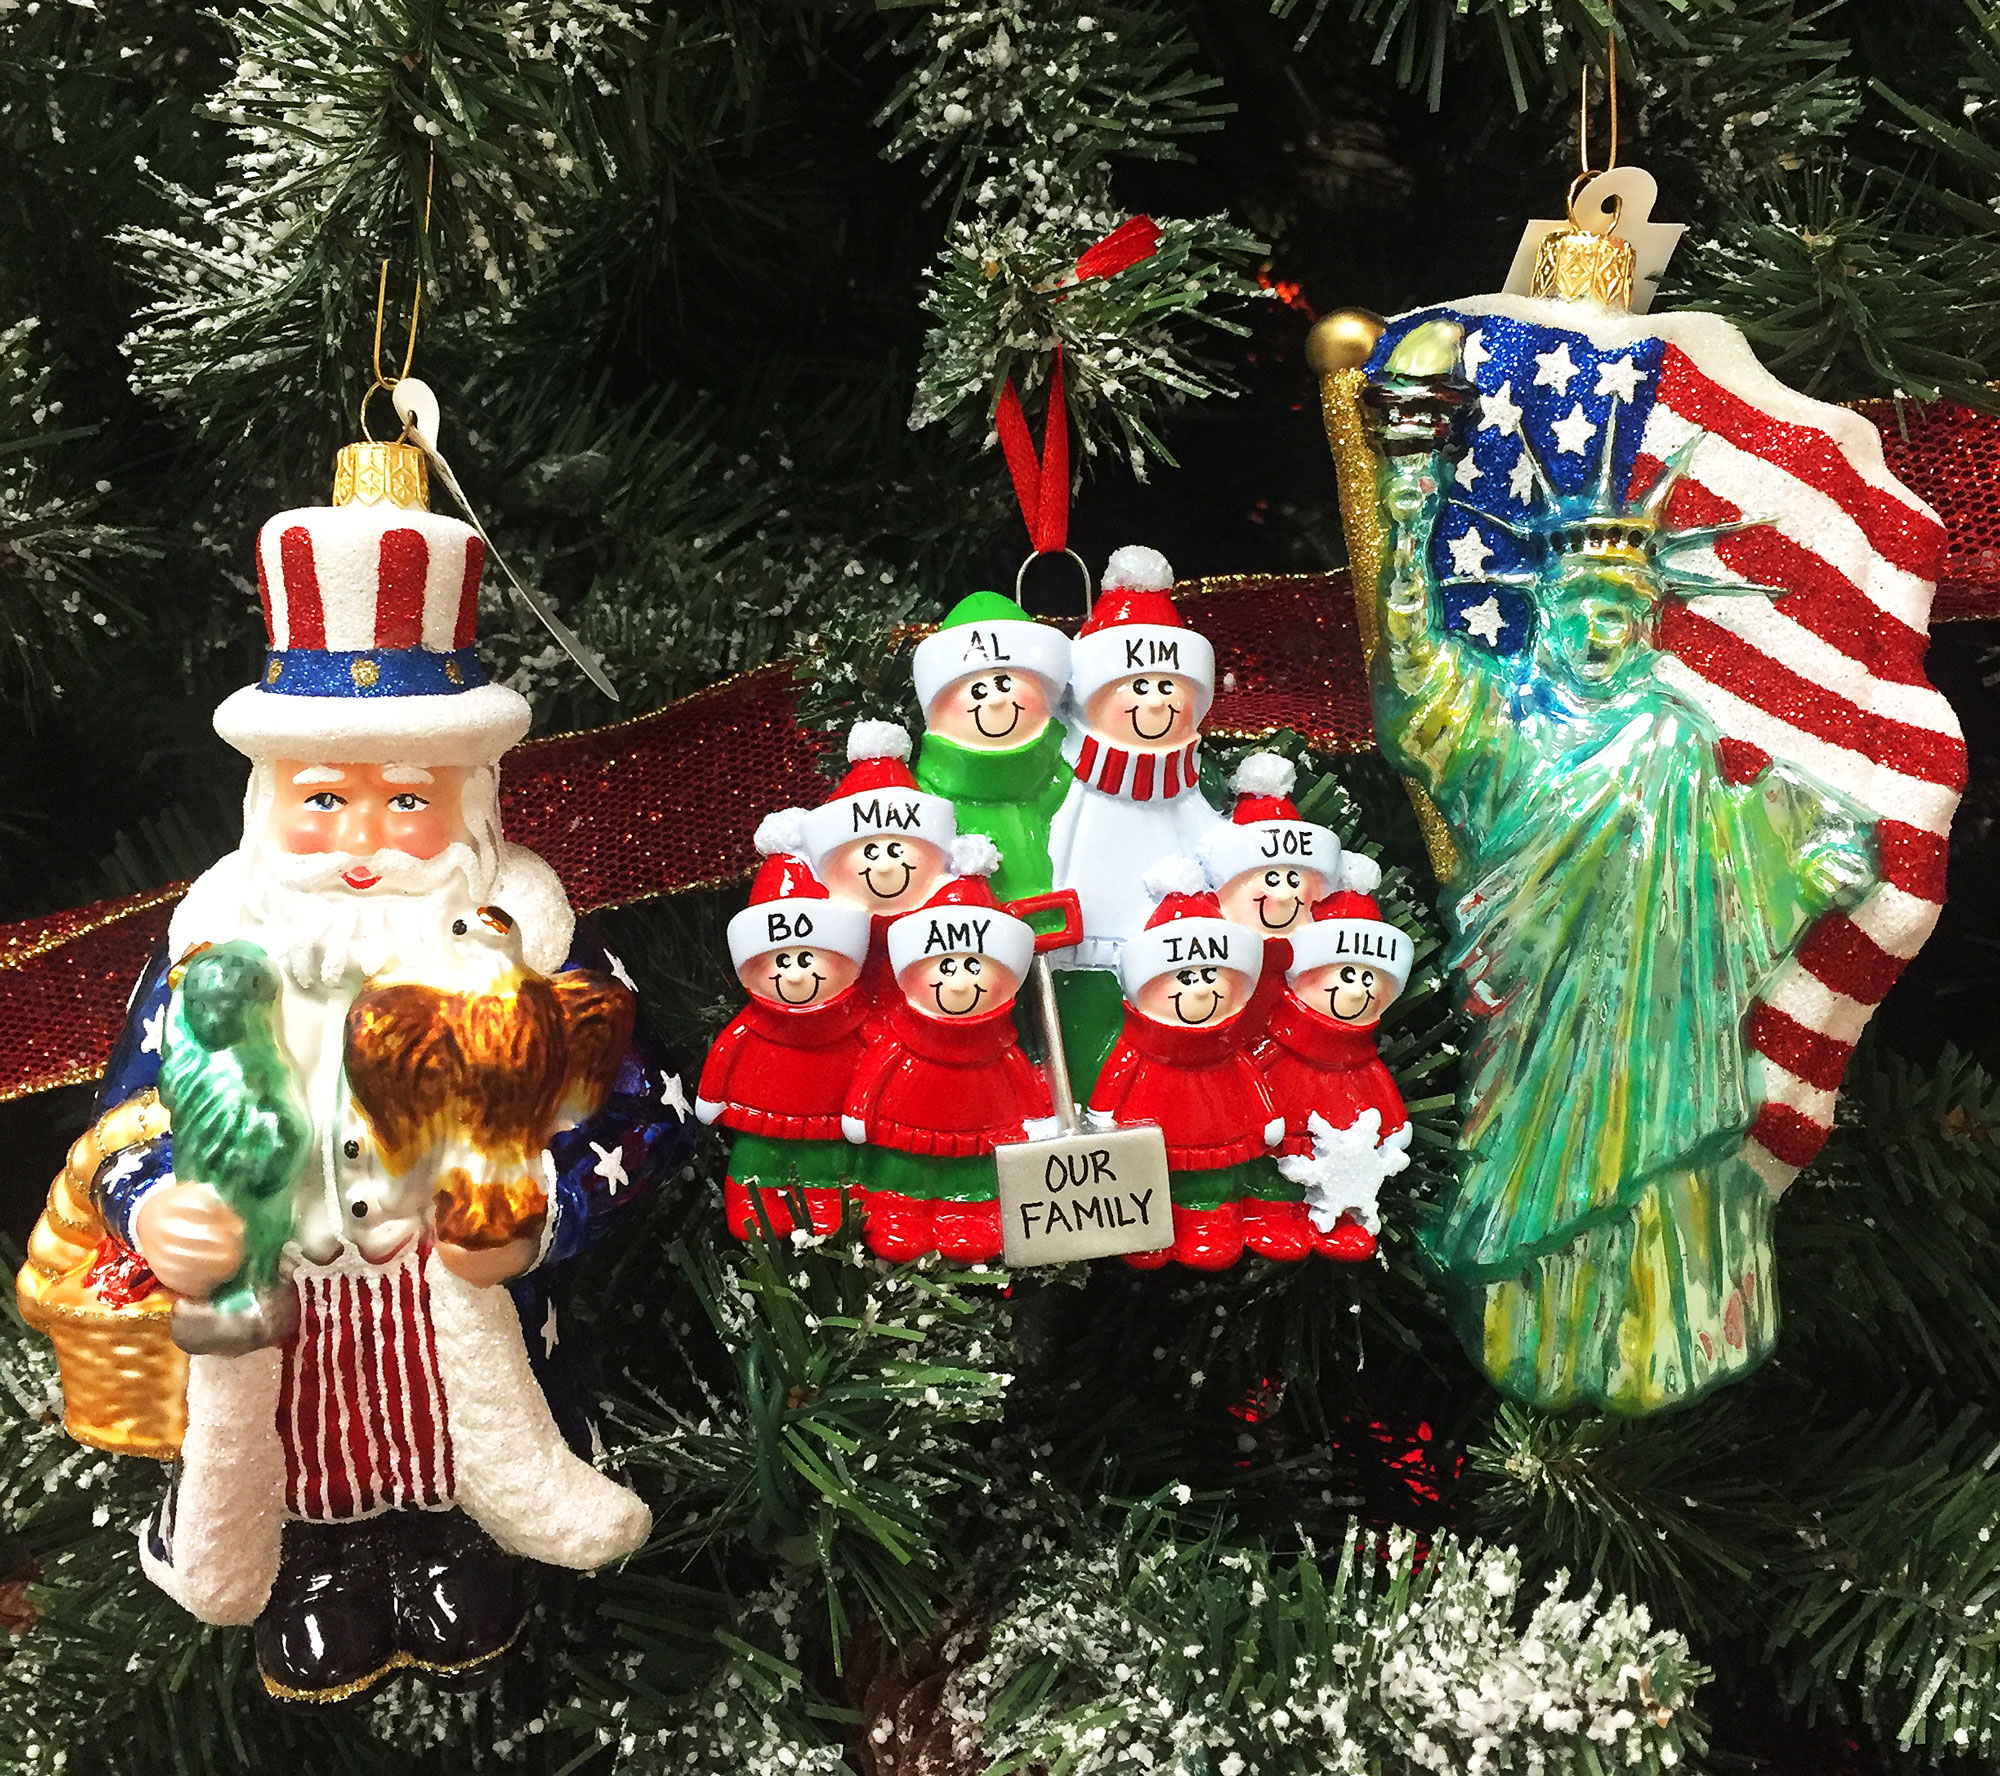 An American Santa ornament holds a mini statue of liberty and bald eagle, a family ornament contains 8 family members all personalzied with names, and a statue of liberty ornament with an American flag | OrnamentShop.com